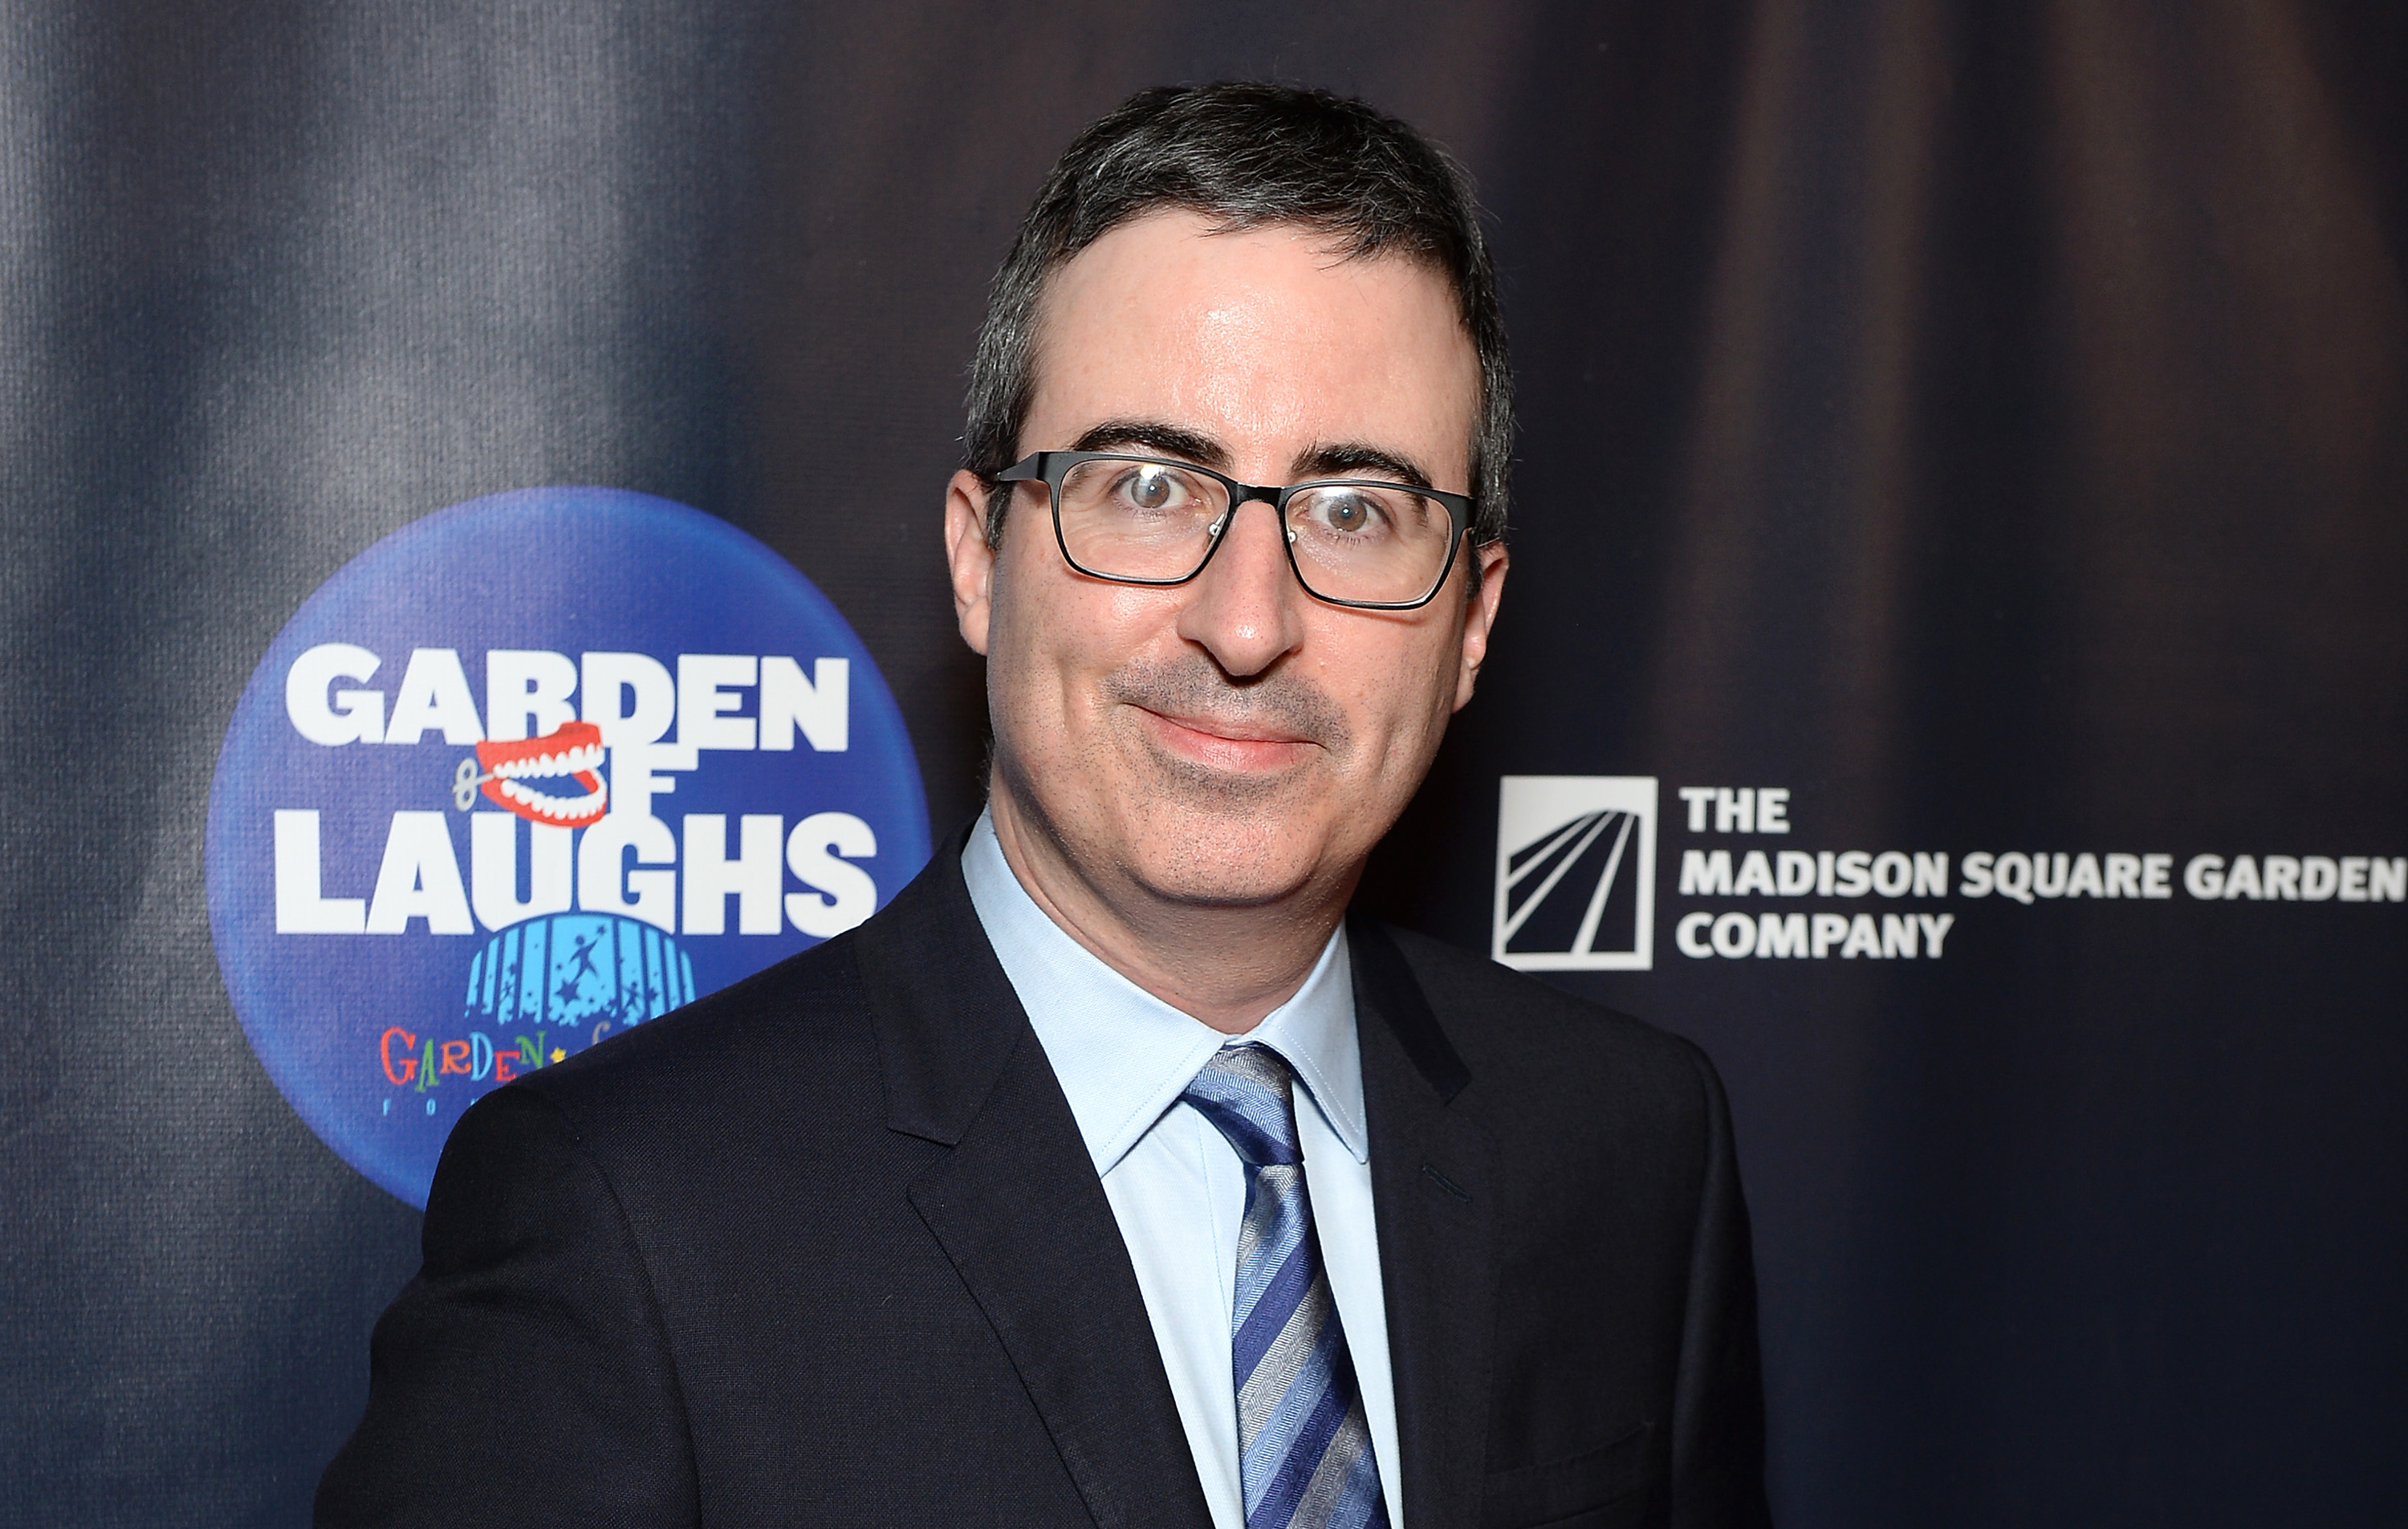 John Oliver attends the 2017 Garden of Laughs at Madison Square Garden on March 28, 2017 in New York City. (Andrew Toth—FilmMagic/Getty Images)